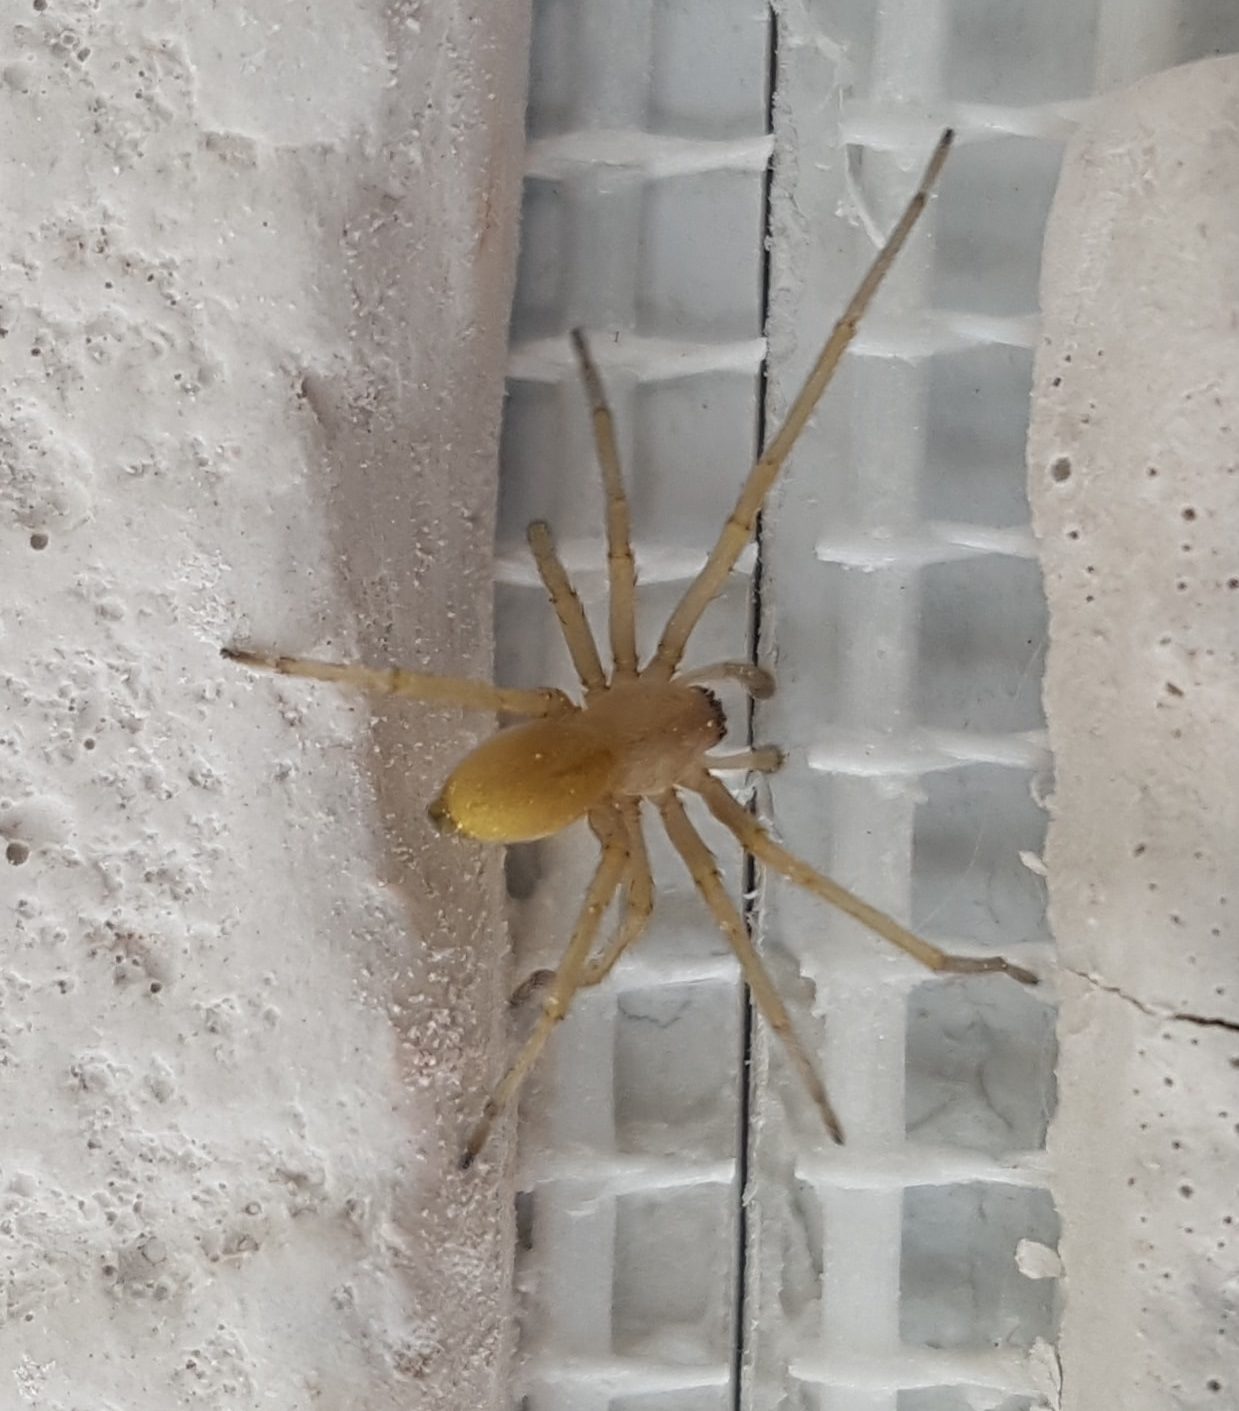 Picture of Cheiracanthium mildei (Long-legged Sac Spider) - Male - Dorsal